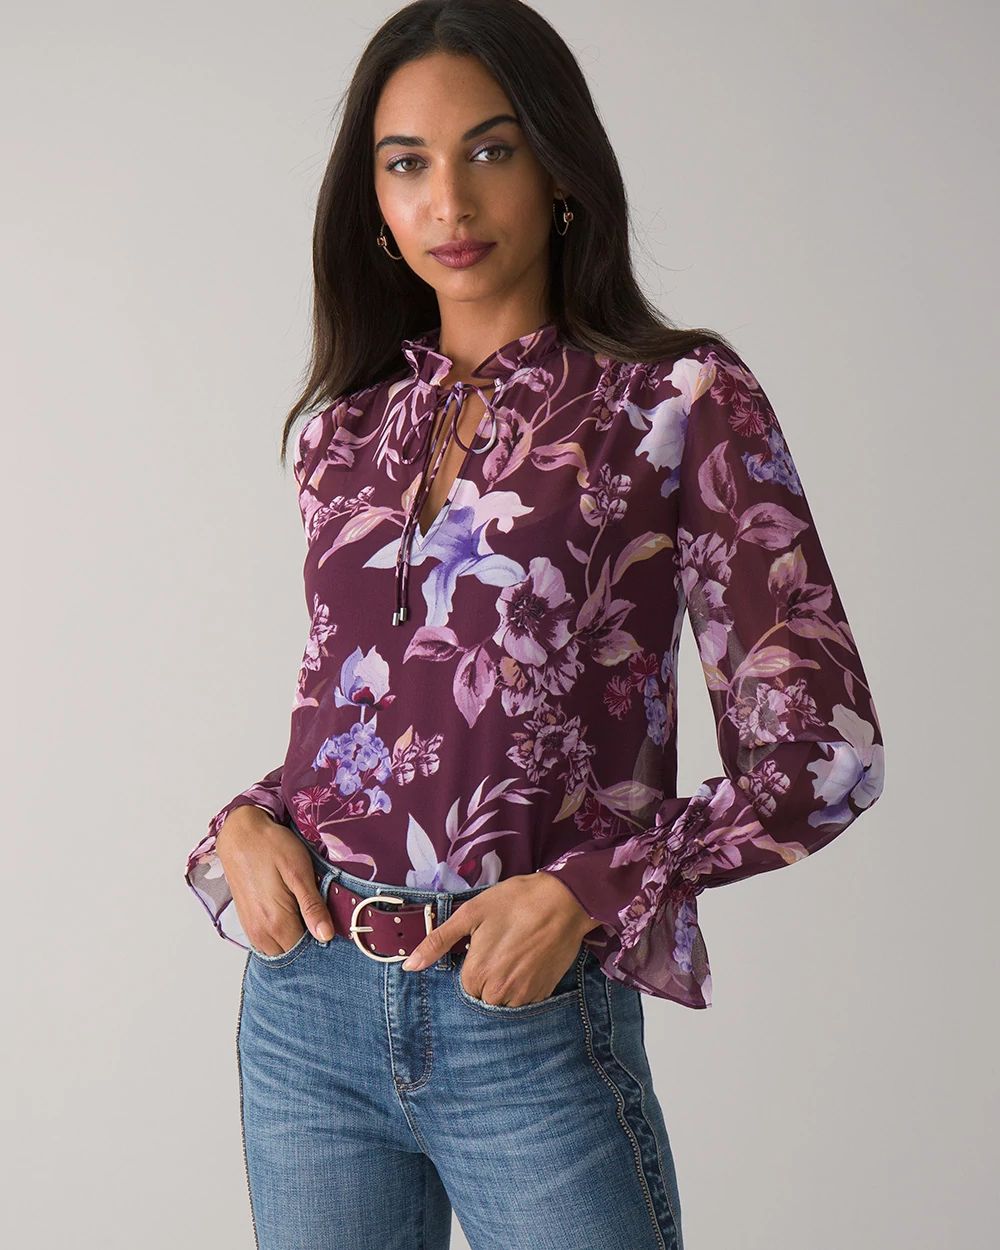 Long Sleeve Tie Neck Printed Blouse click to view larger image.